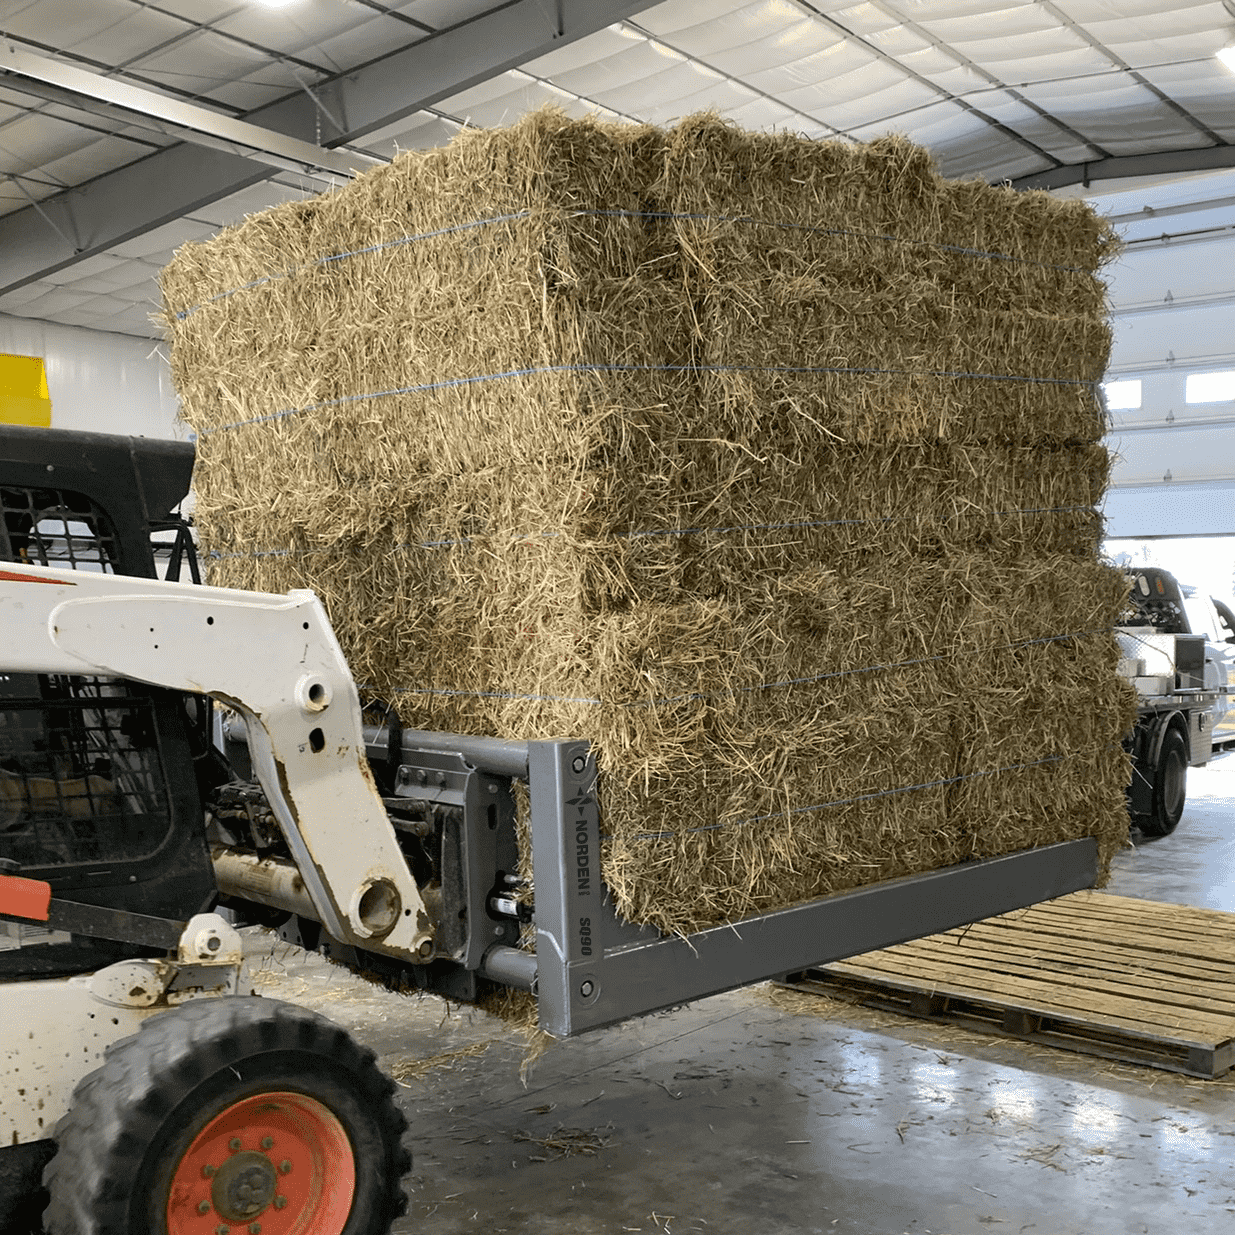 Norden SQ90 bale squeeze lifting 60 bales of hay